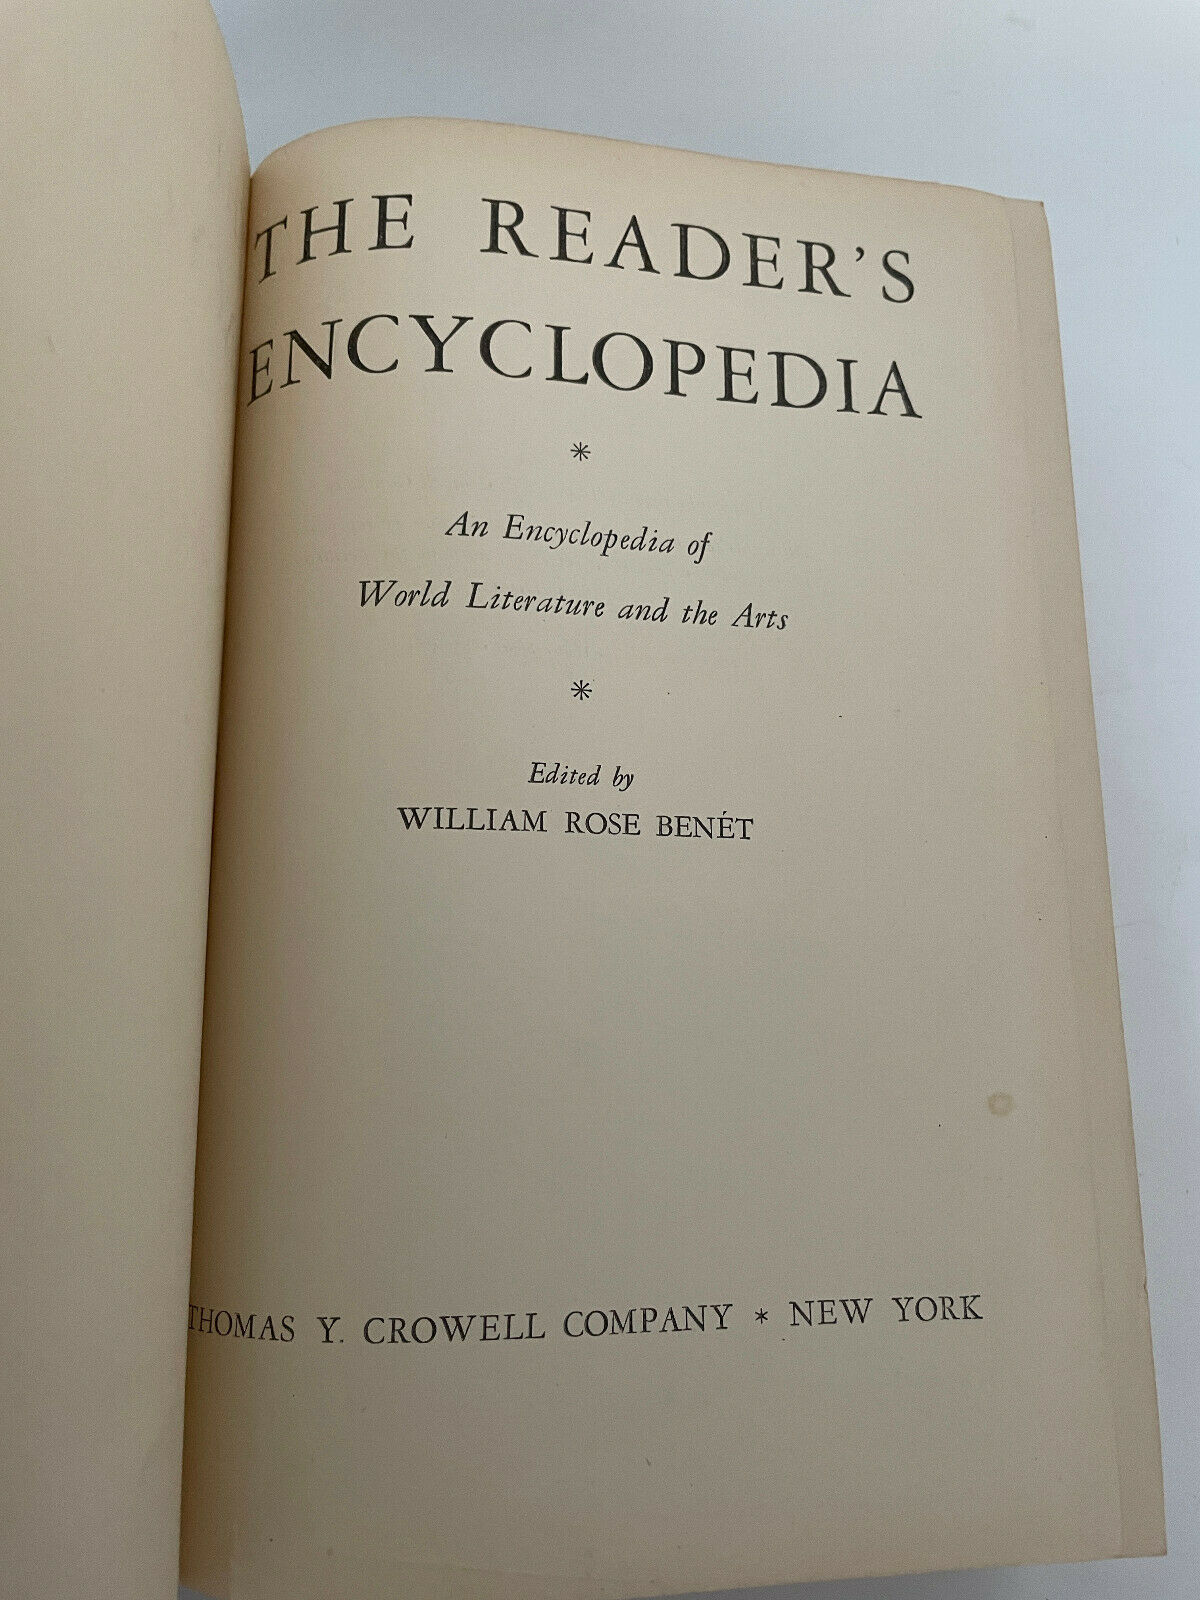 The Readers Encyclopedia, World Literature & Arts edited by William Rose Benet 1948